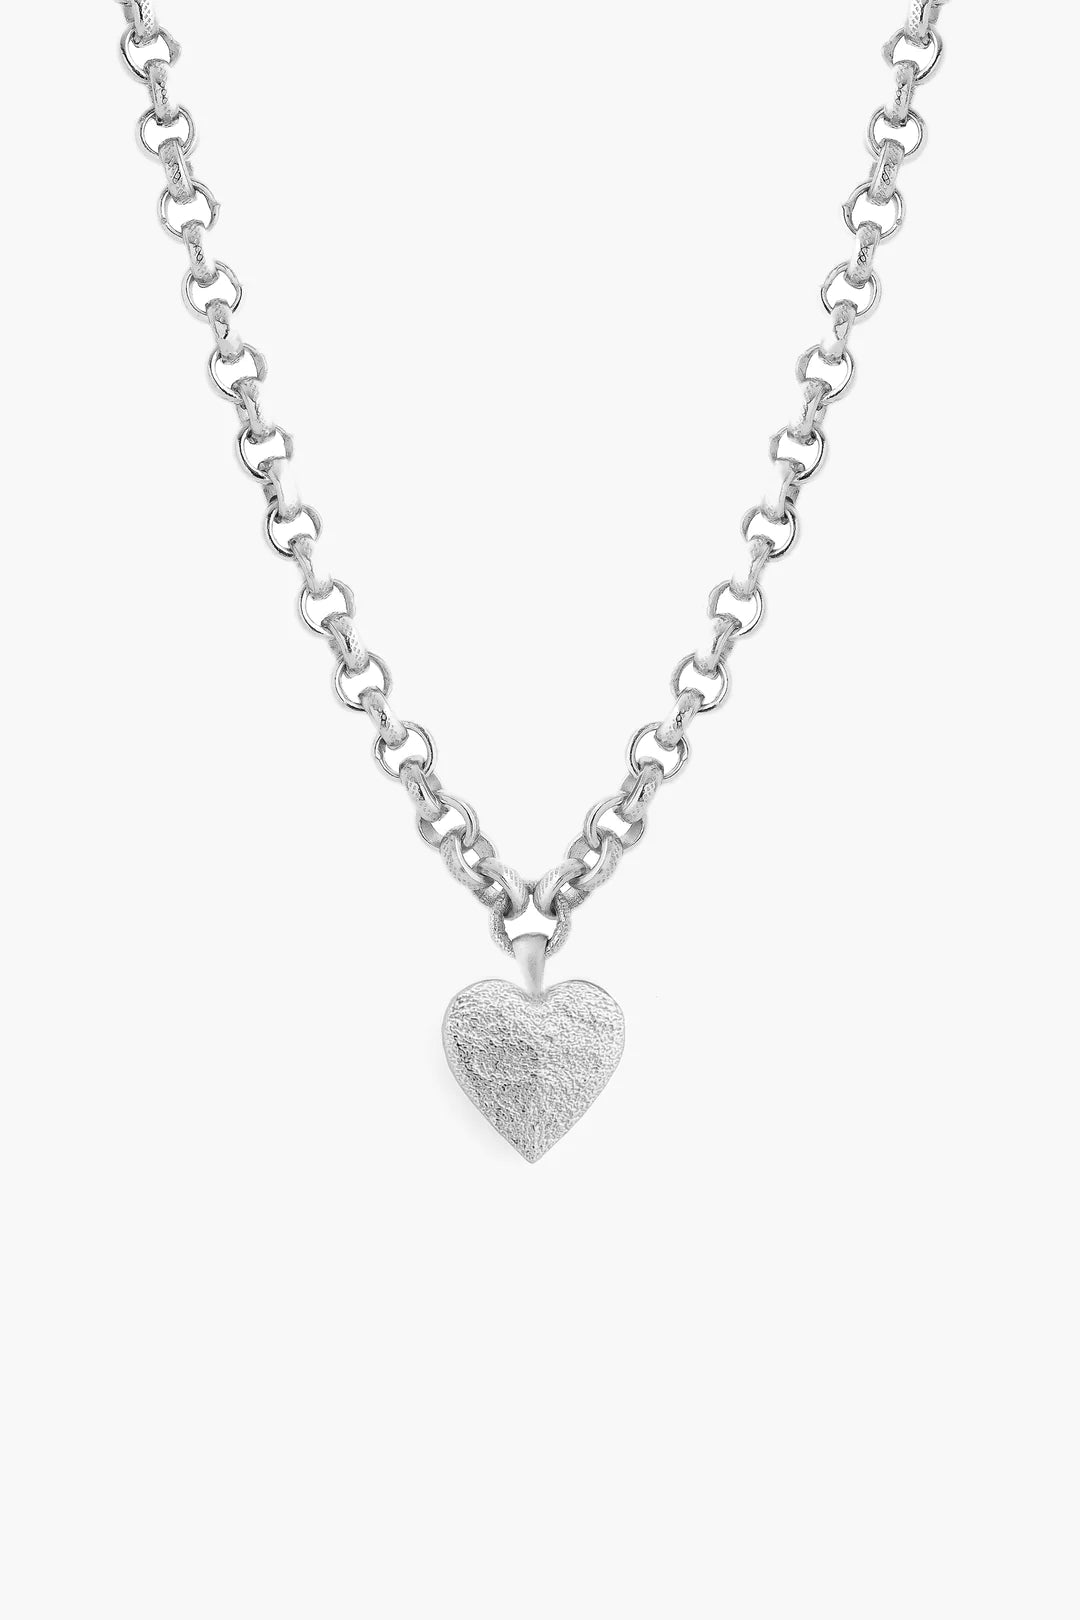 SOLACE SILVER NECKLACE